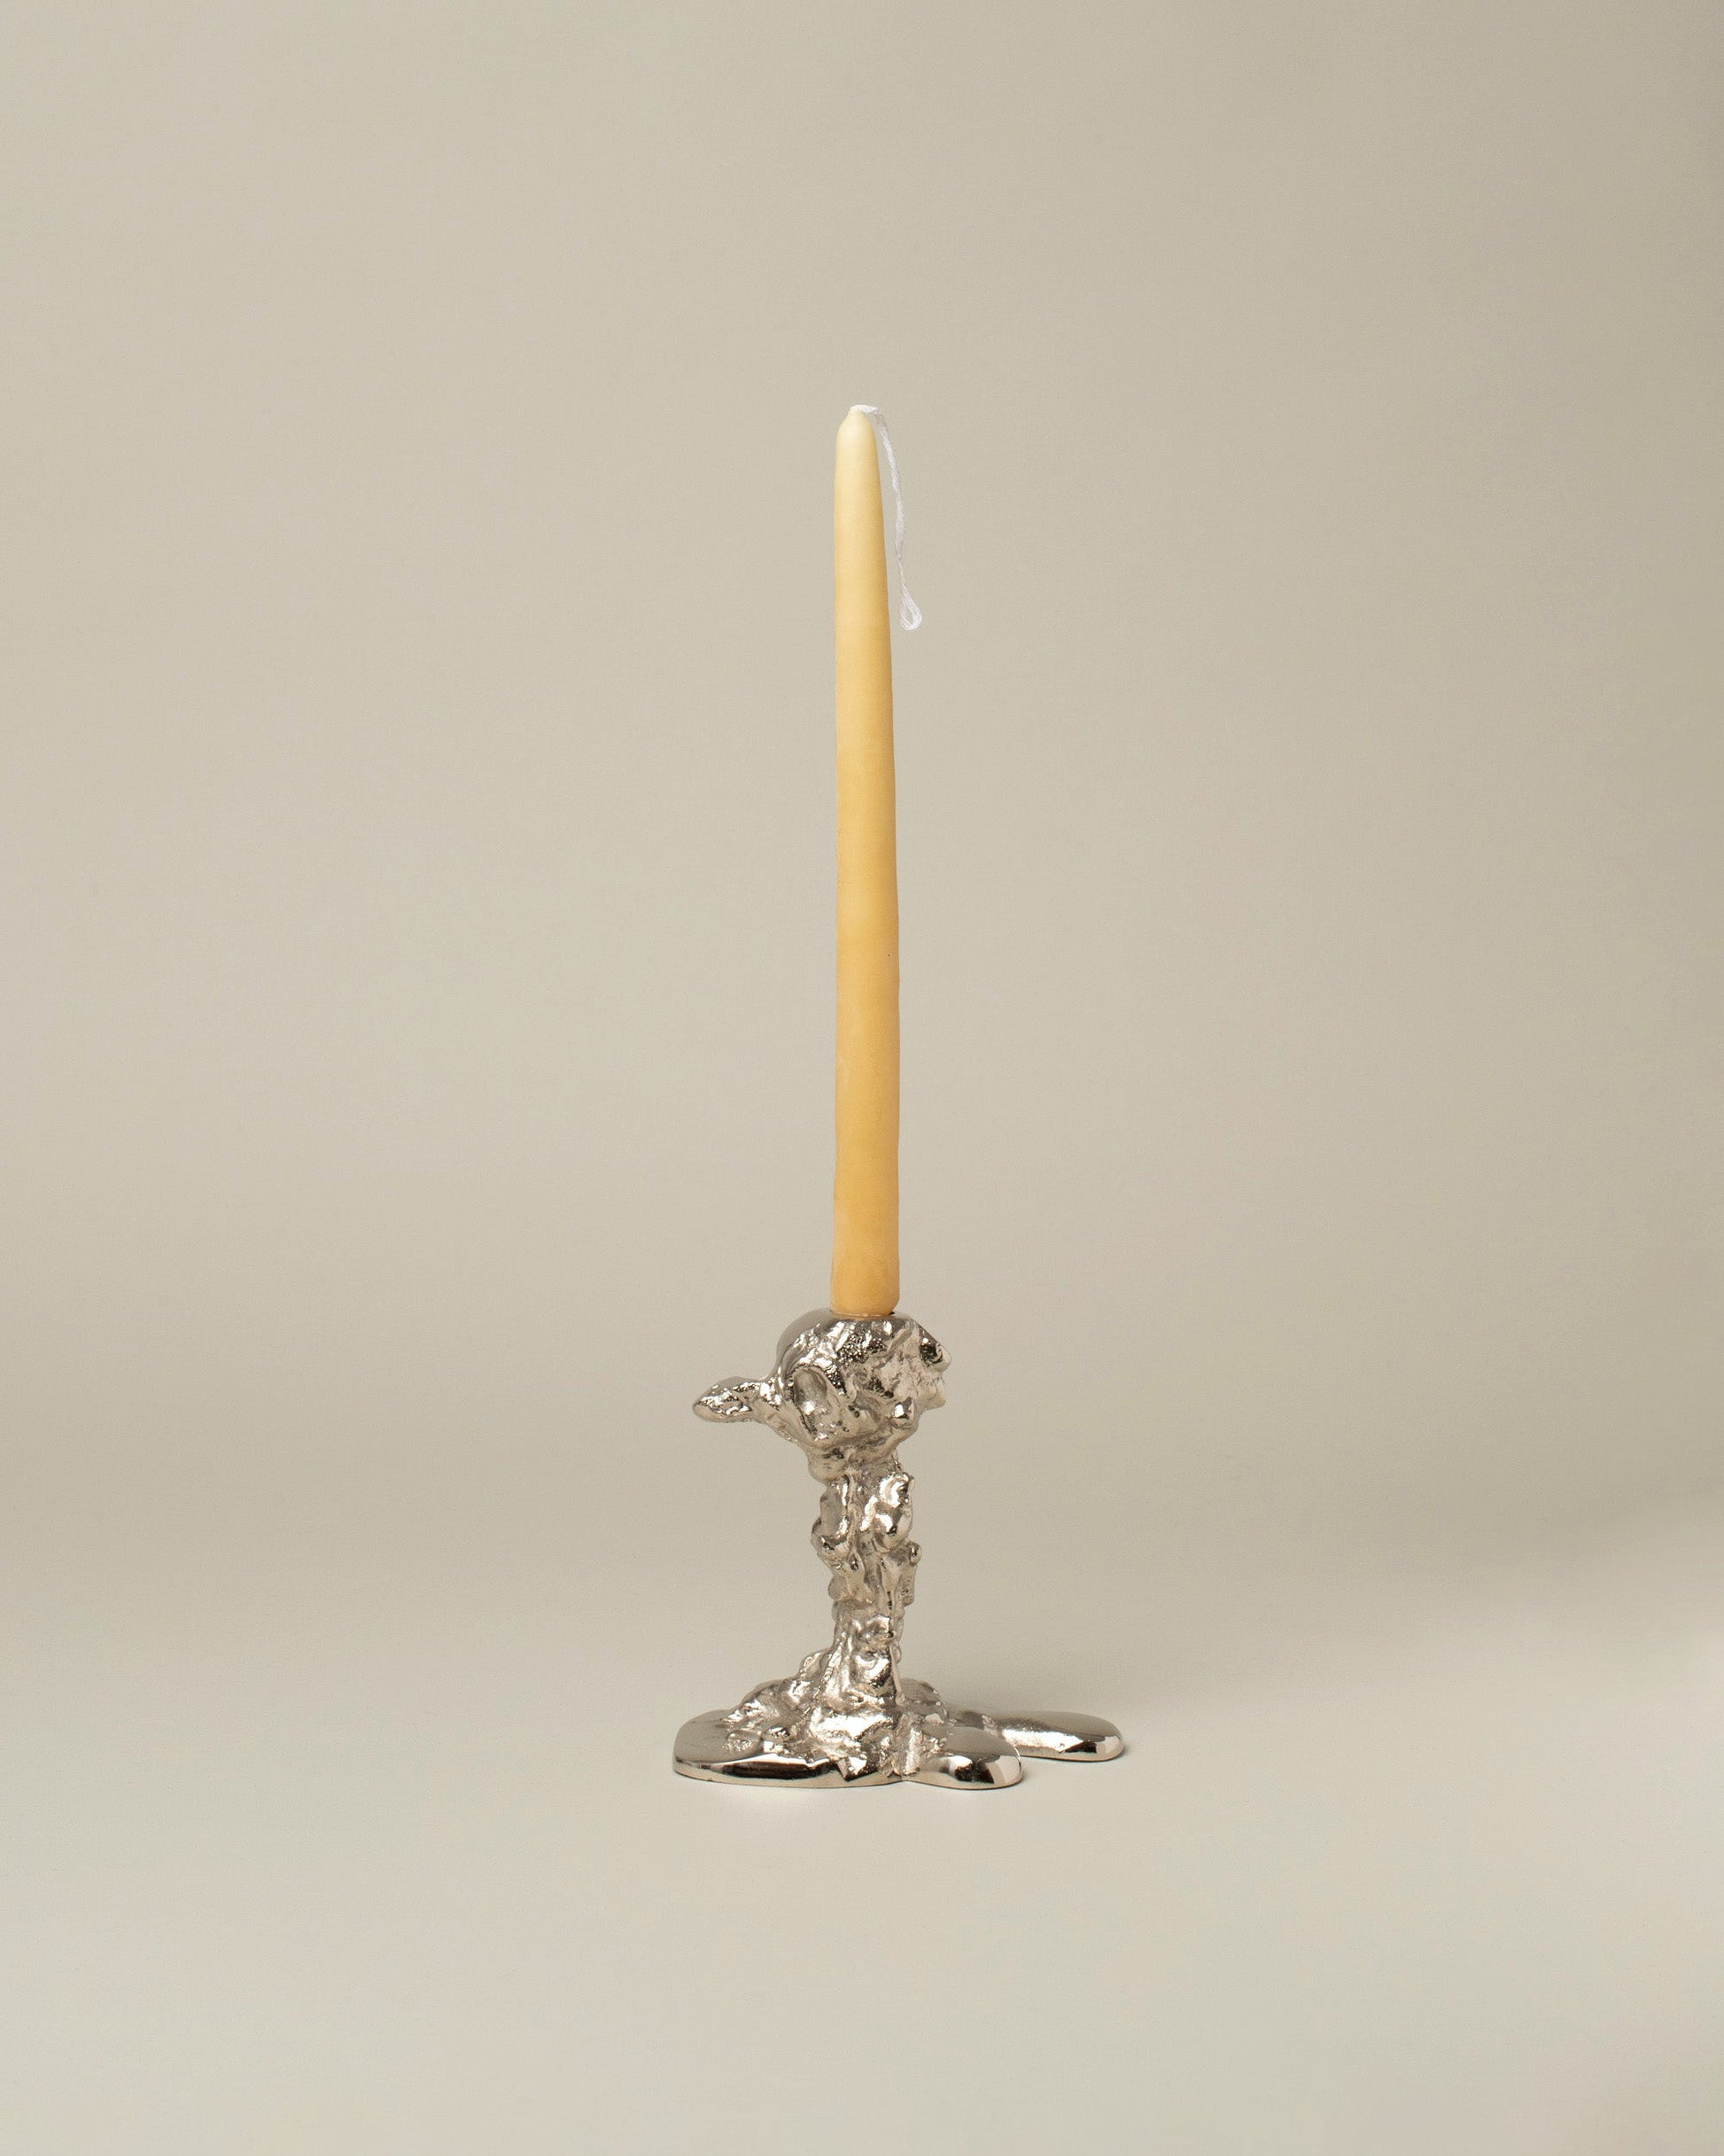 POLSPOTTEN Silver Small Drip Candle Holder on light color background.